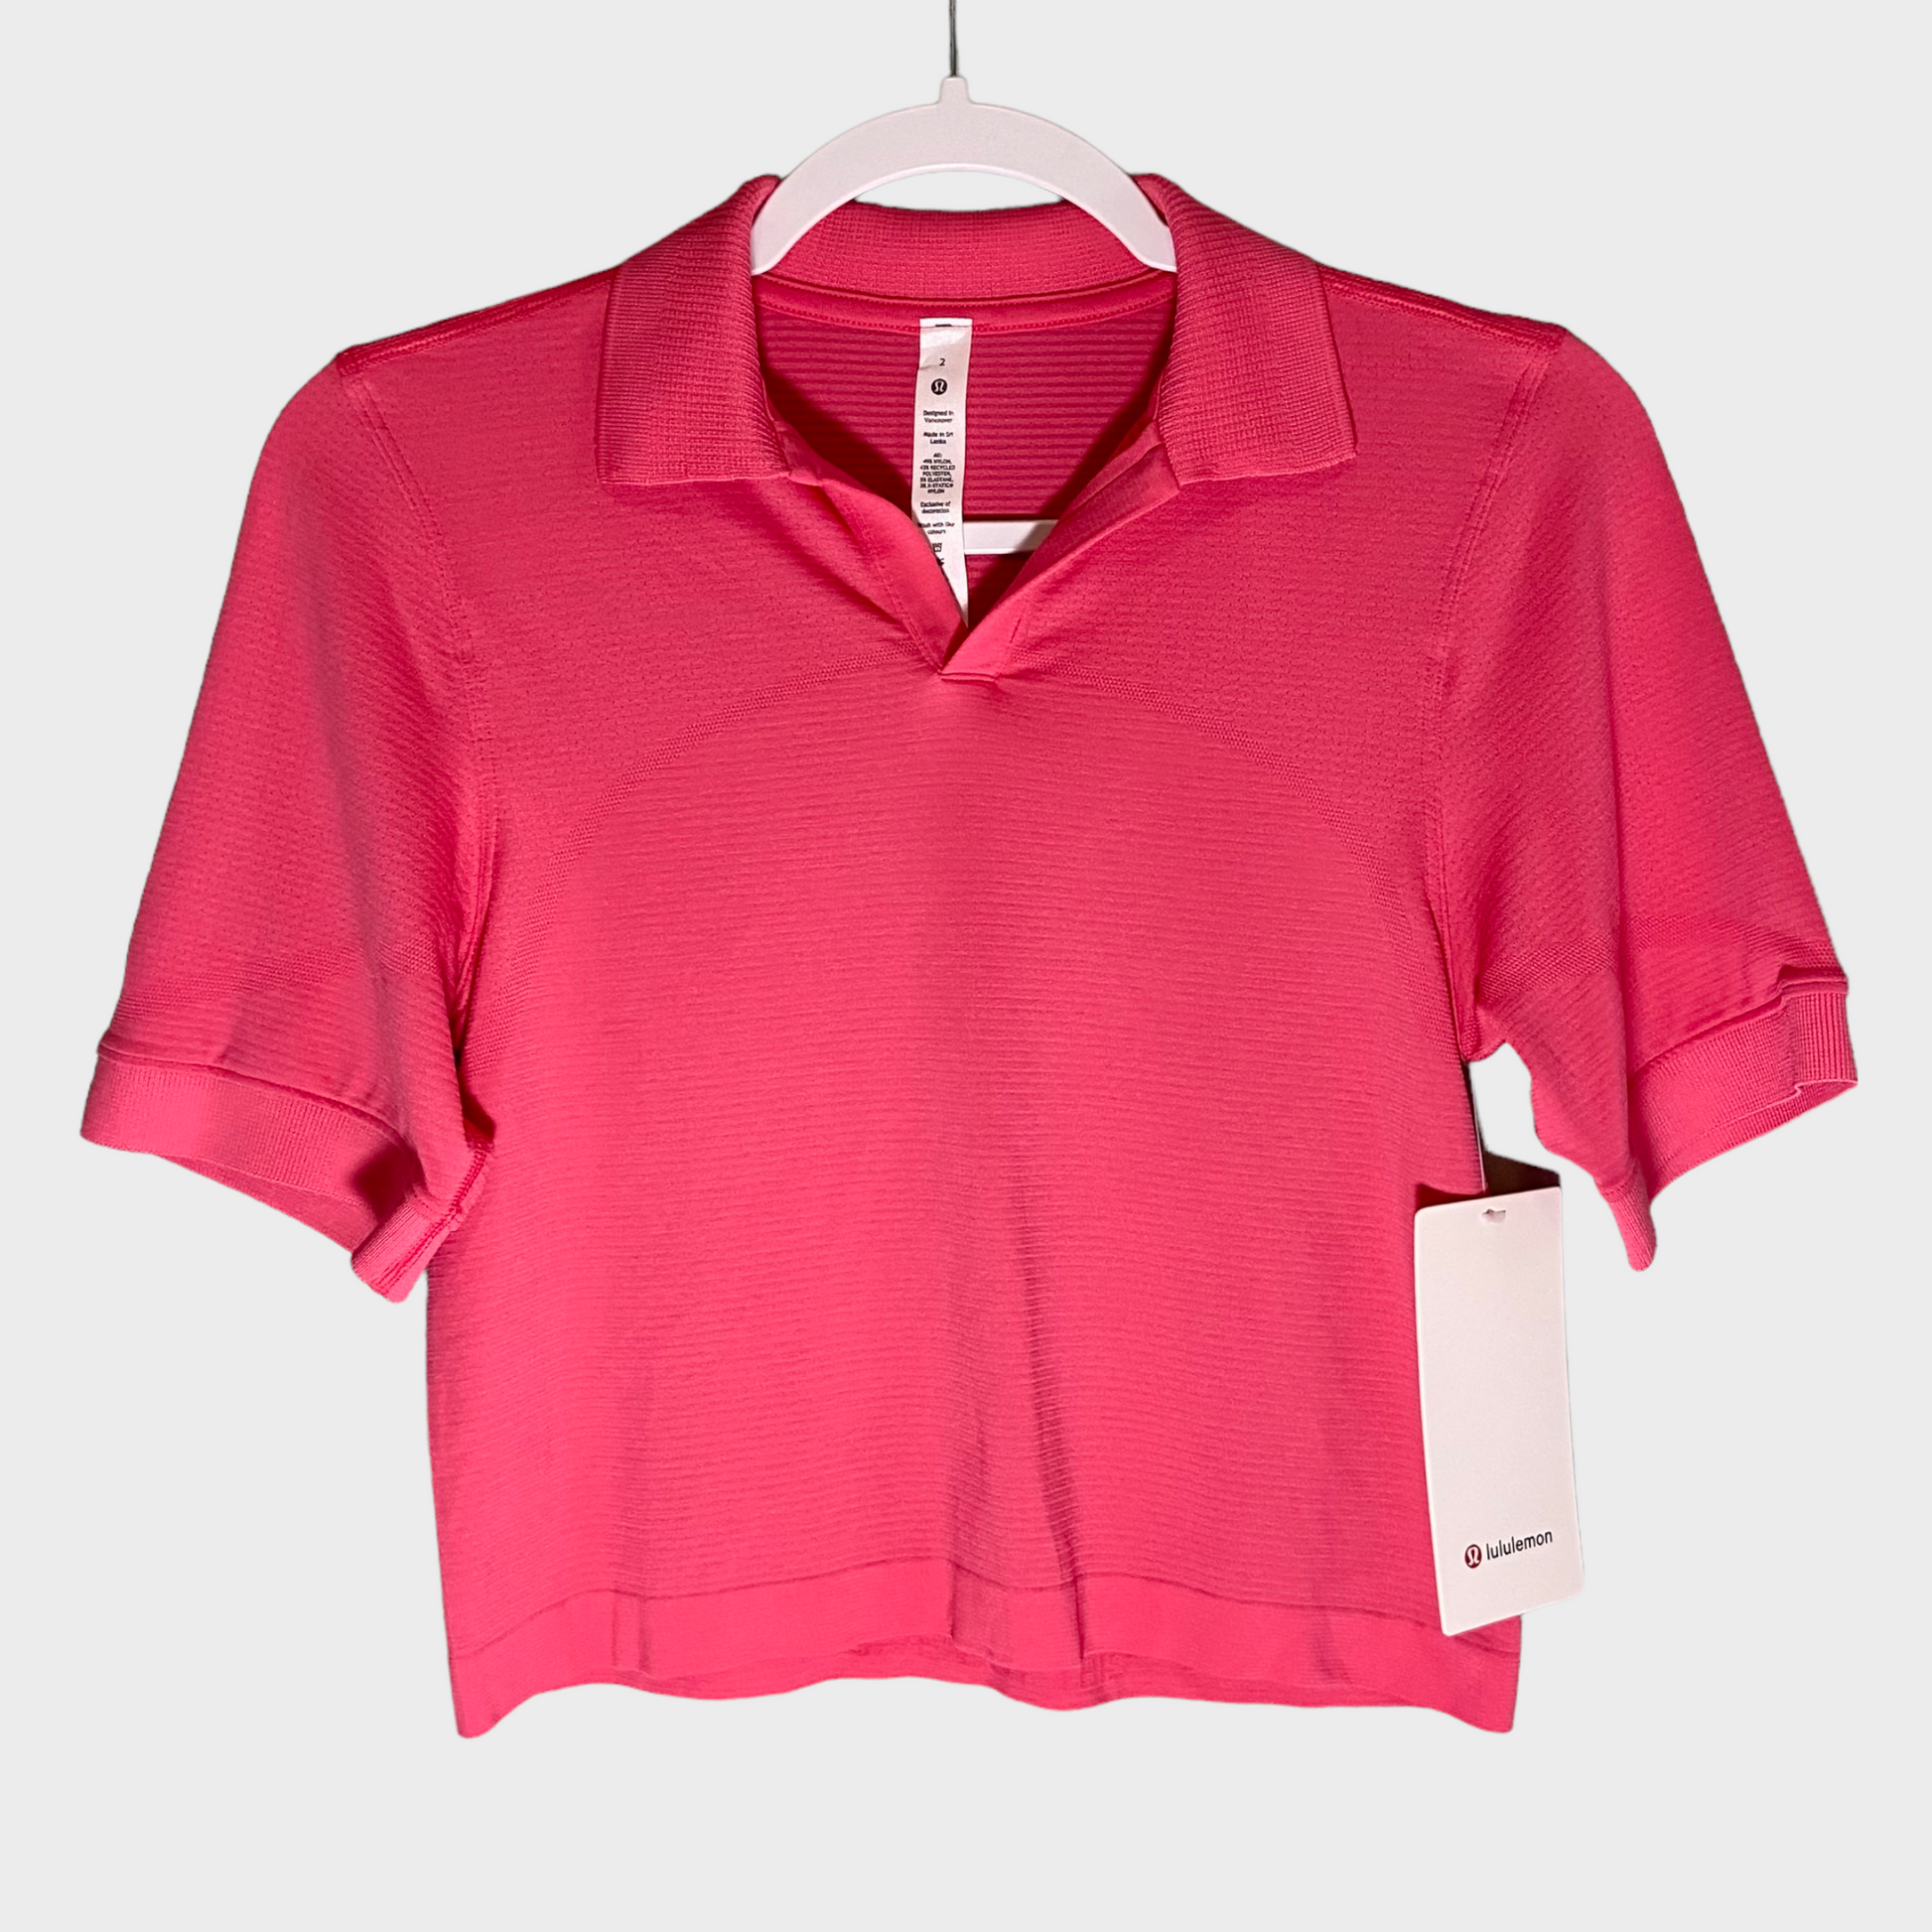 New Lululemon Swiftly Tech Relaxed-Fit Polo Shirt Hot heat red glow